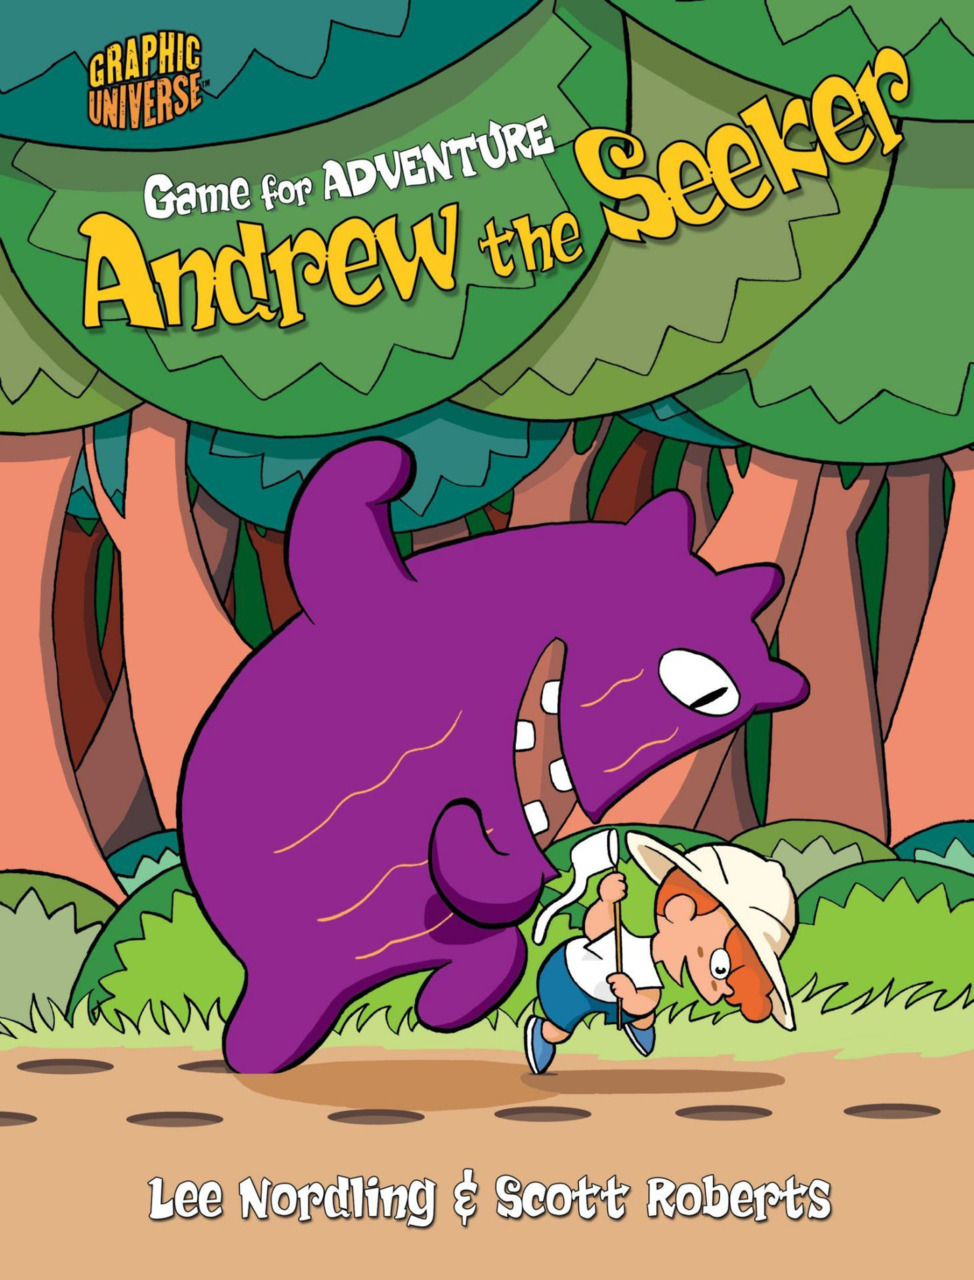 Game for adventure. : a graphic novel. Andrew the seeker :